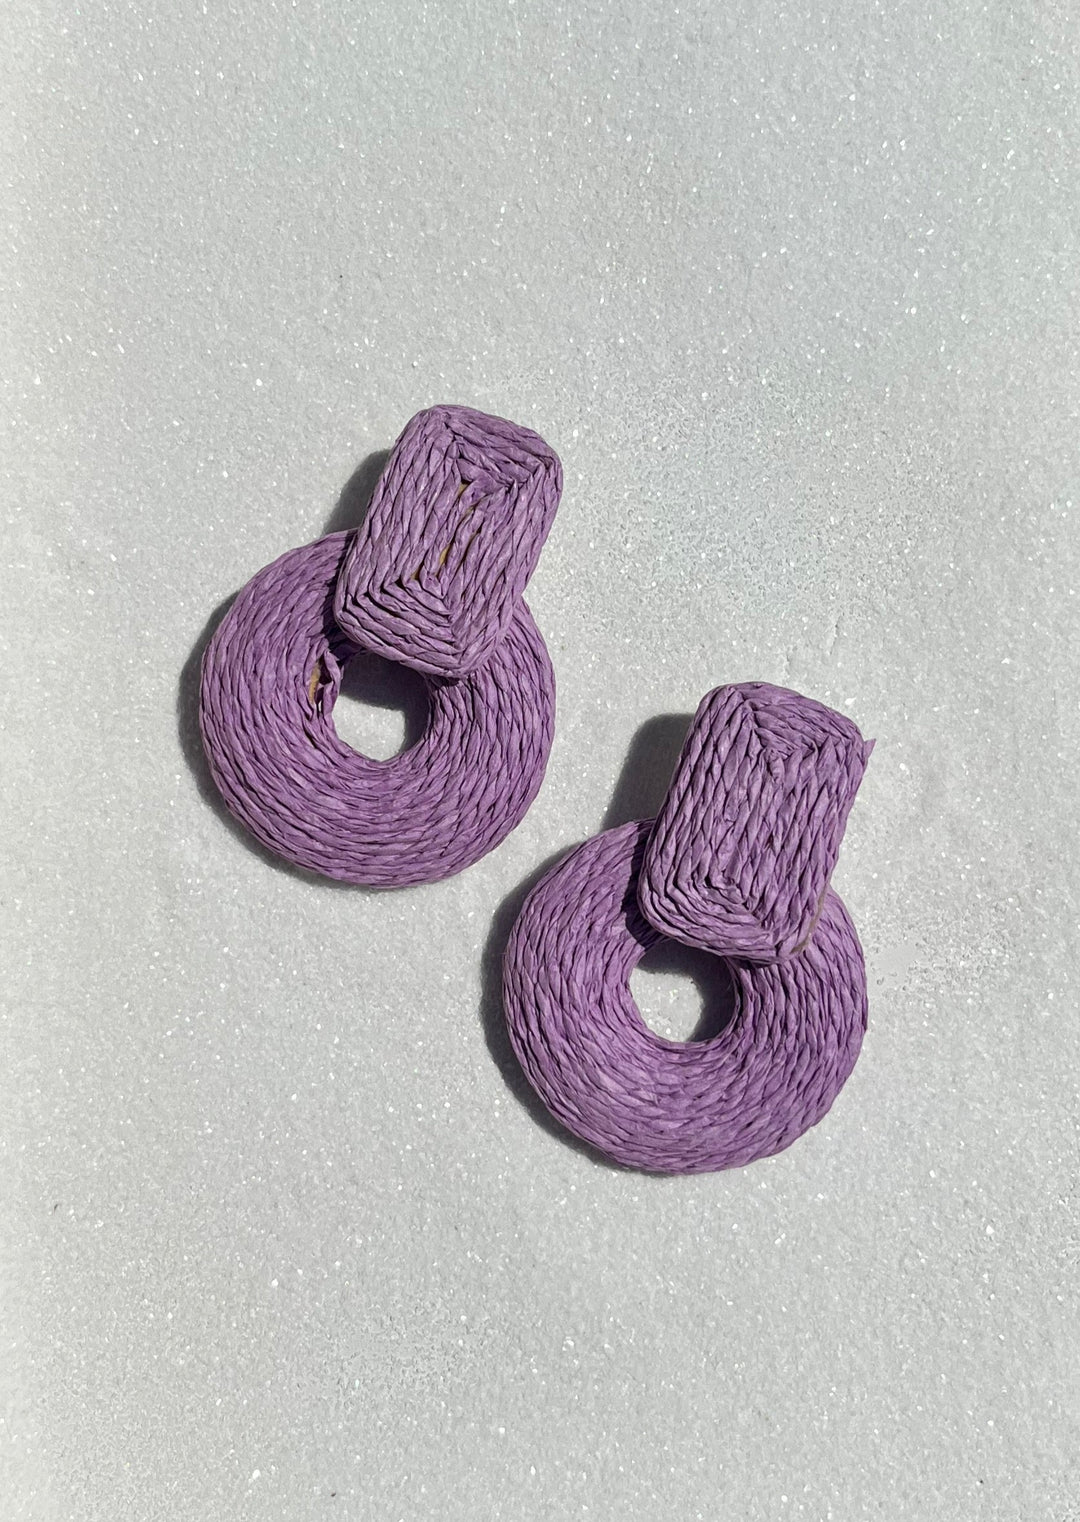 Go Frogs Earrings, Jewelry, Adeline, Adeline, dallas boutique, dallas texas, texas boutique, women's boutique dallas, adeline boutique, dallas boutique, trendy boutique, affordable boutique